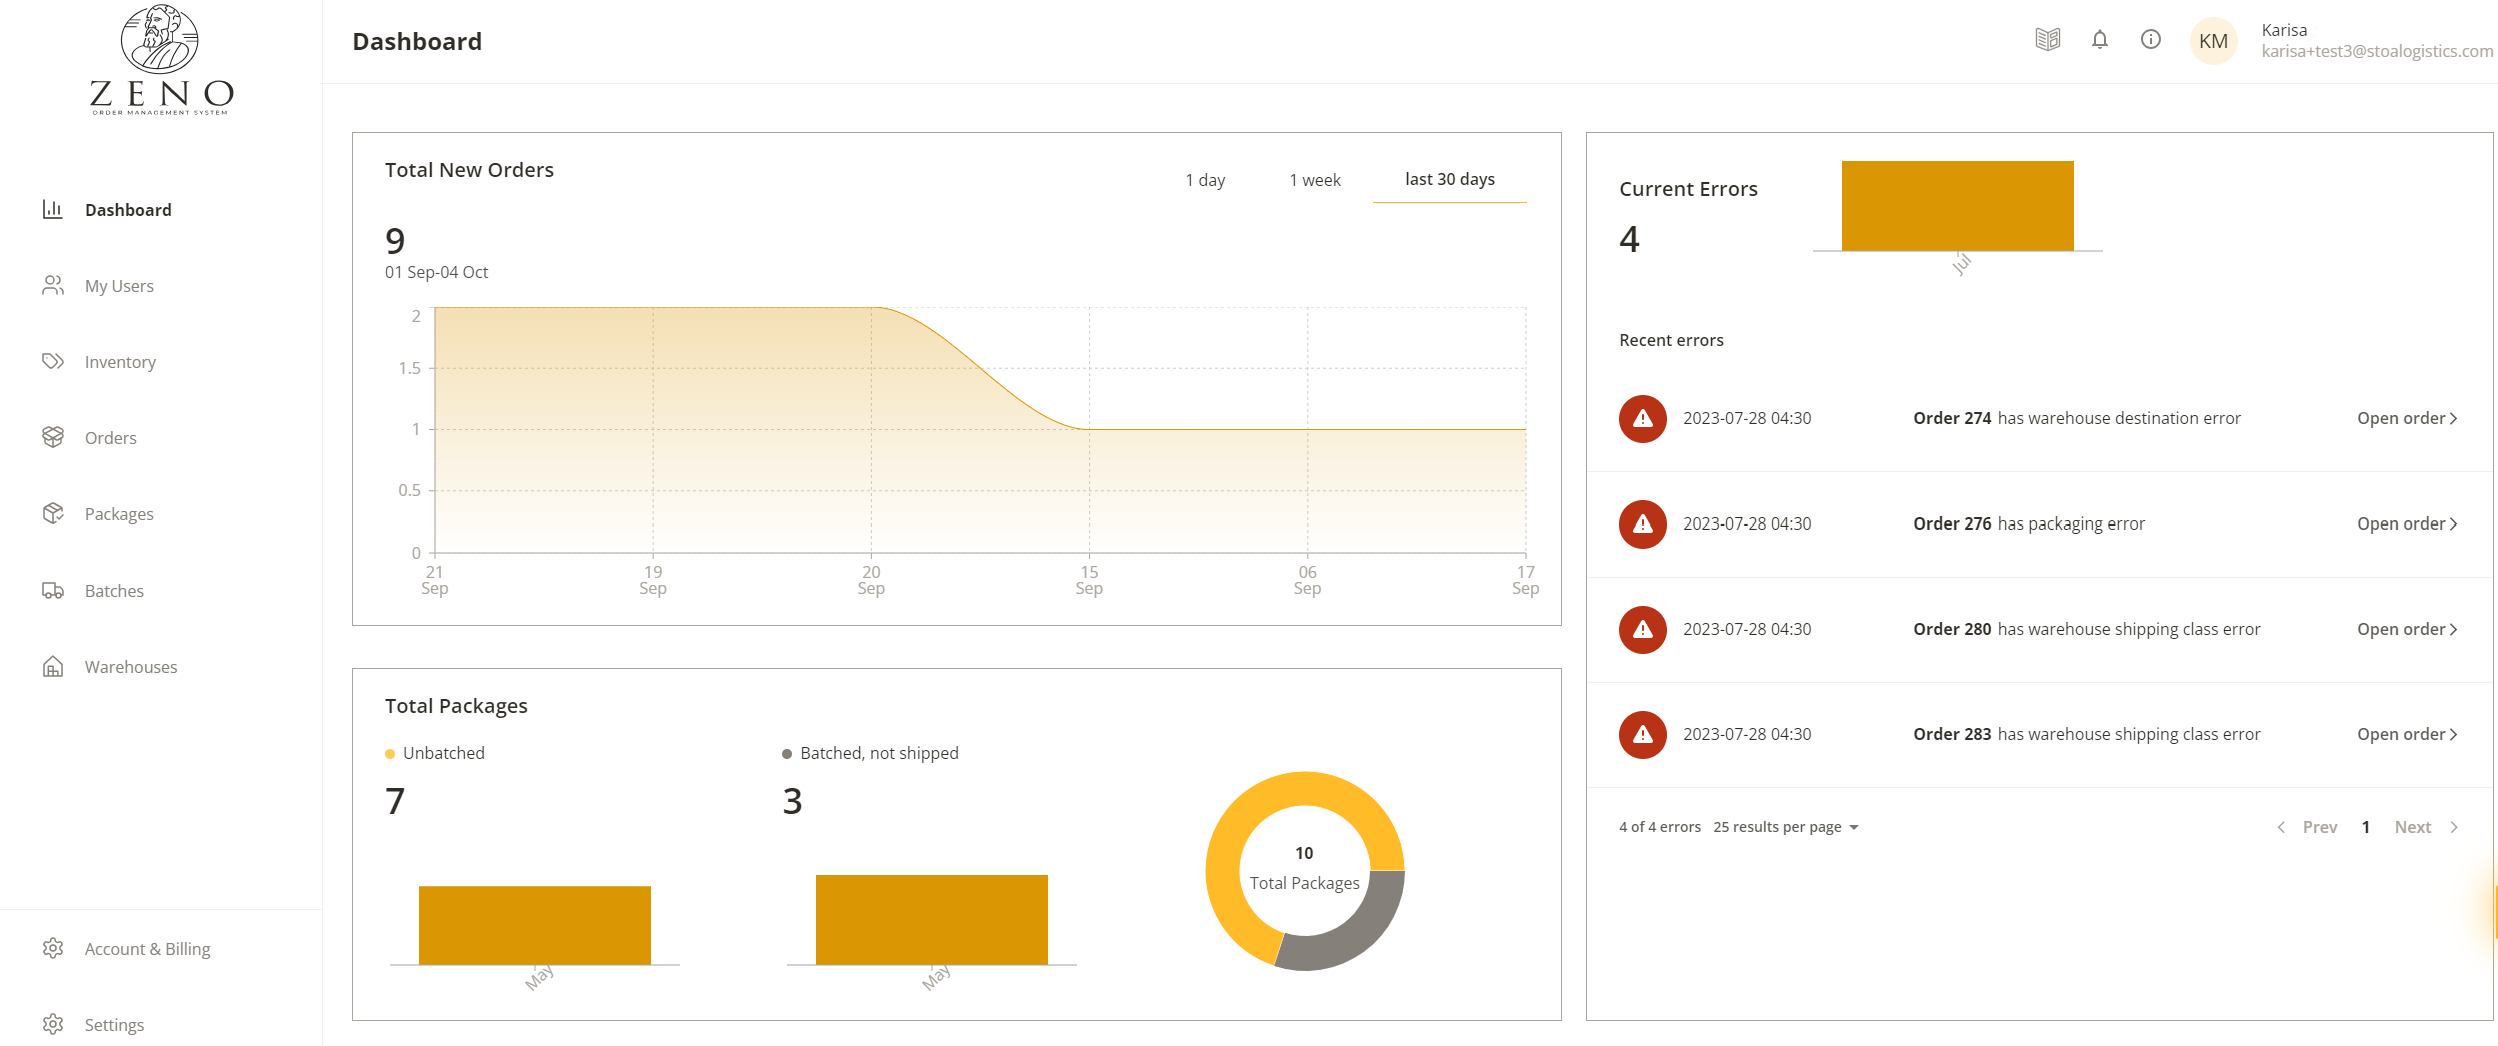 A dedicated Dashboard page for all of your fulfillment data. Here you can get real time information and analytics regarding your orders and fulfillment performance.